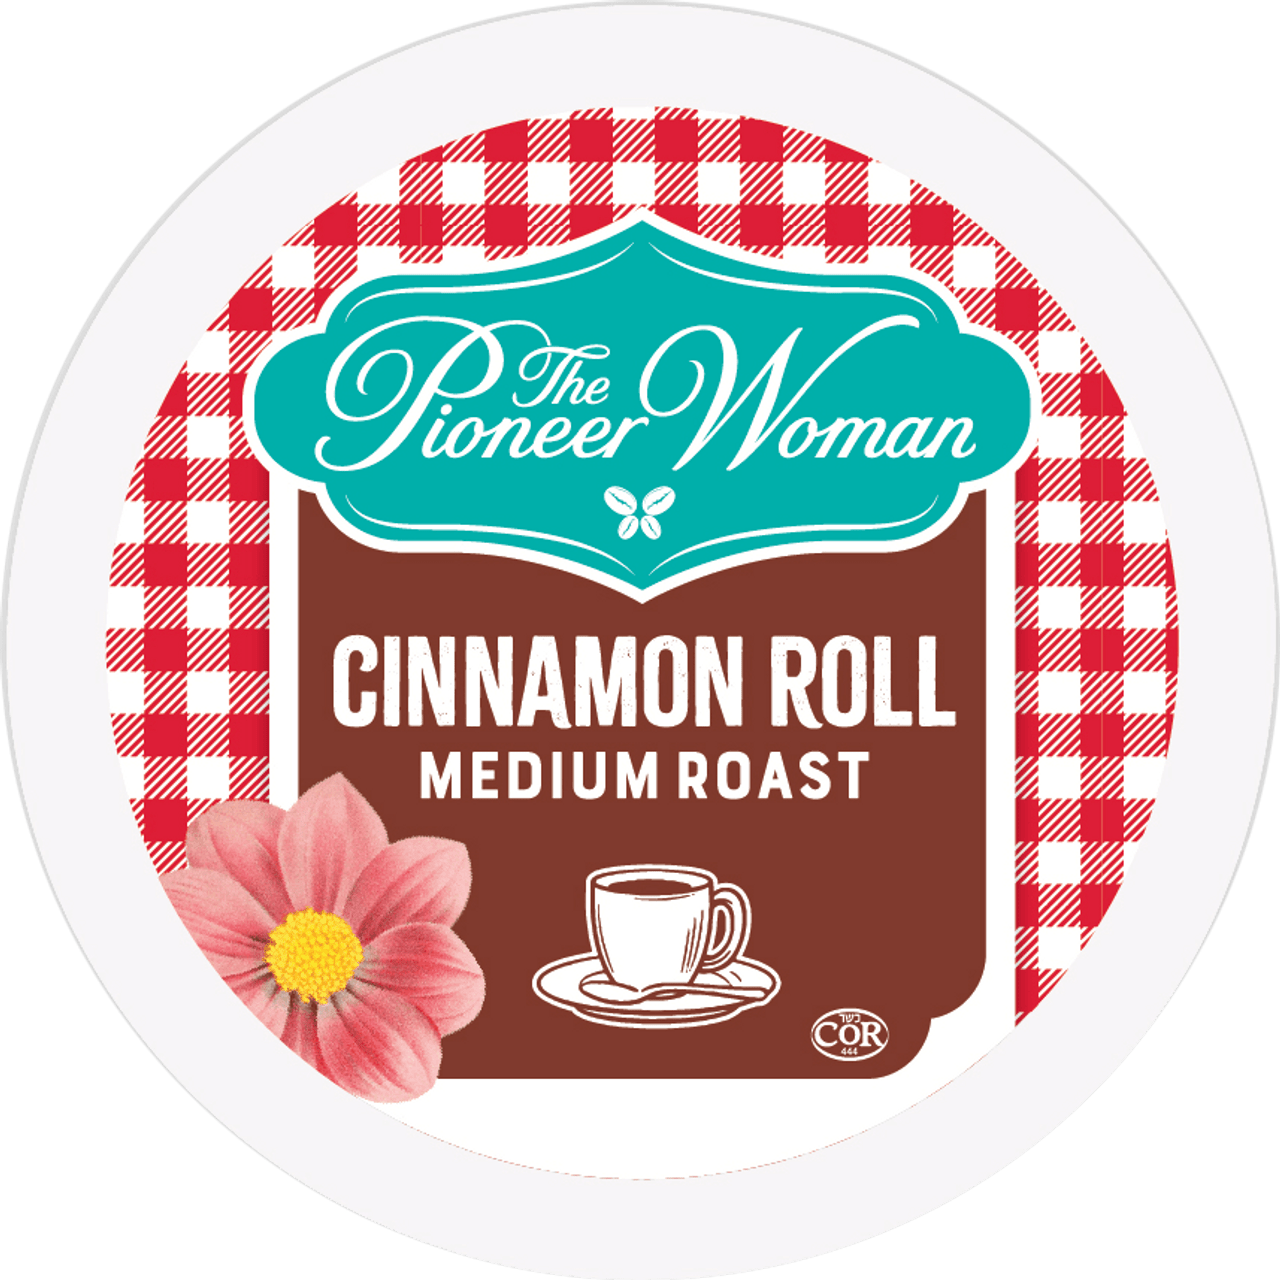 https://cdn11.bigcommerce.com/s-0s7s4kh/images/stencil/1280x1280/products/1596/9568/Cinnamon_Roll__56120.1631617688.png?c=3